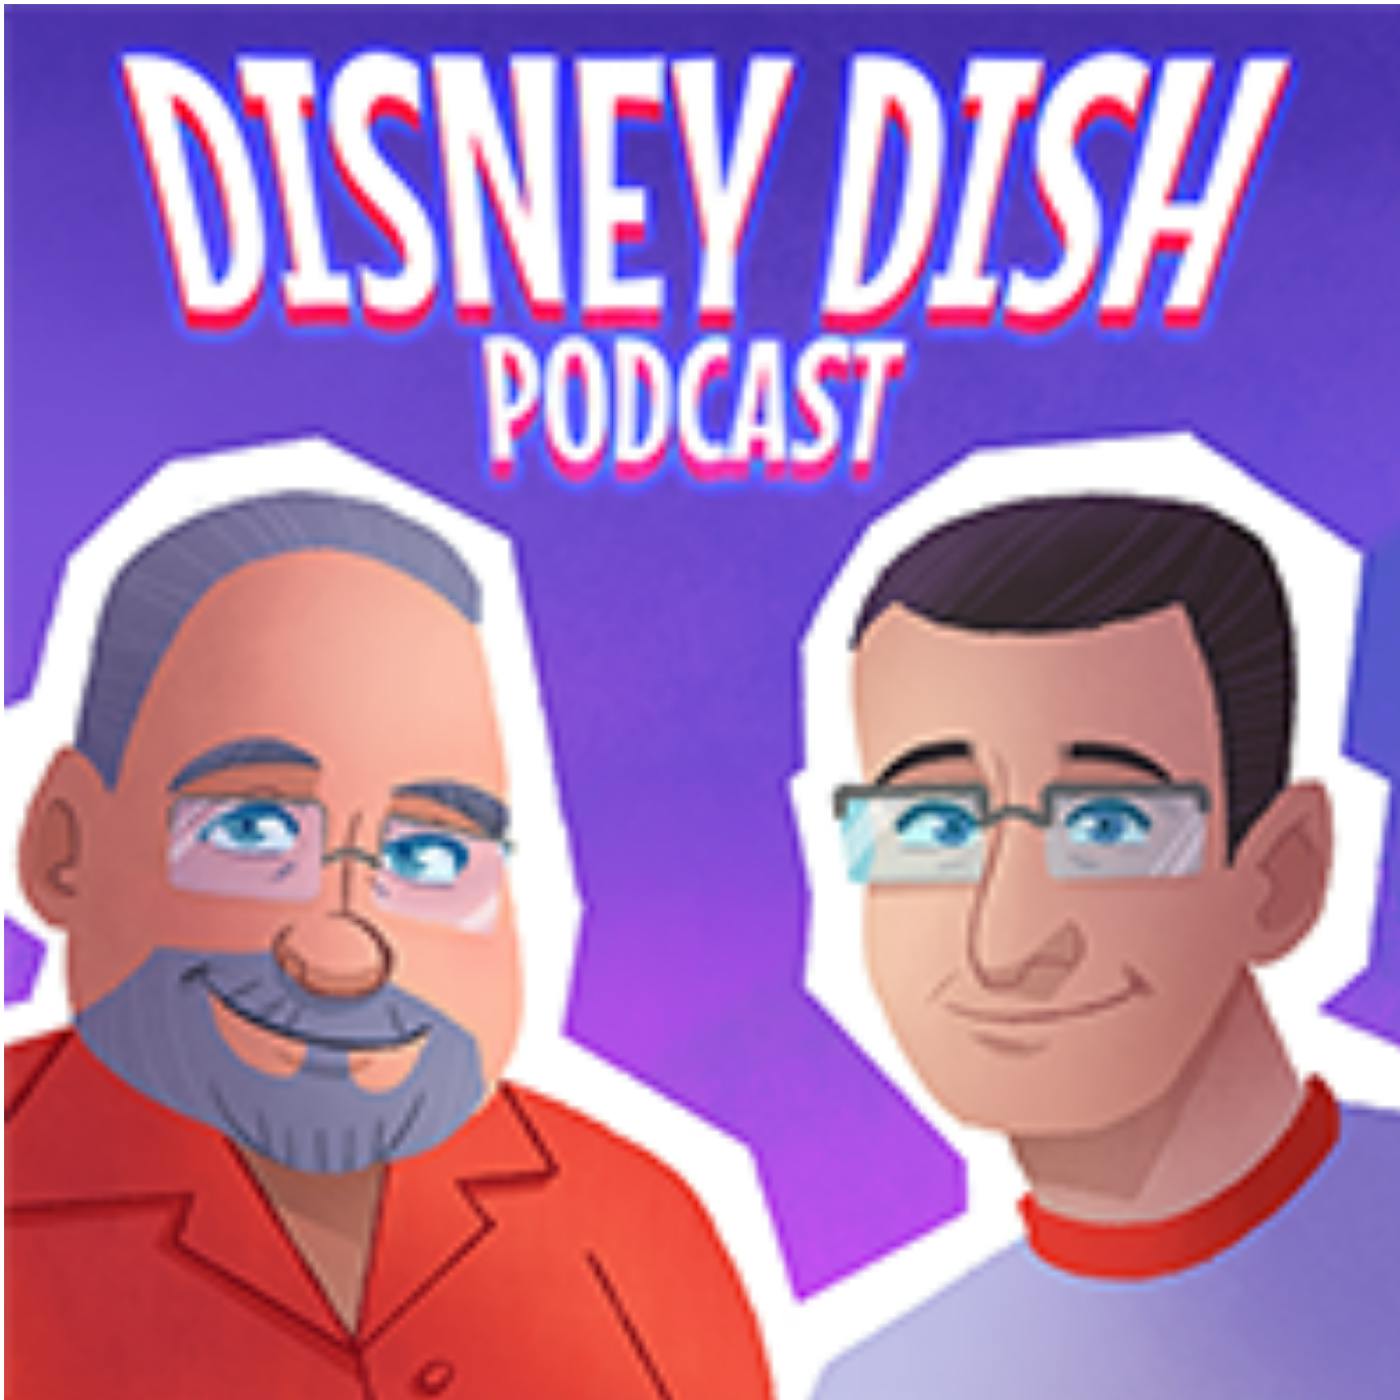 The Disney Dish with Jim Hill Episode 456: Is Jollywood Nights now worth spending your Christmas cash on